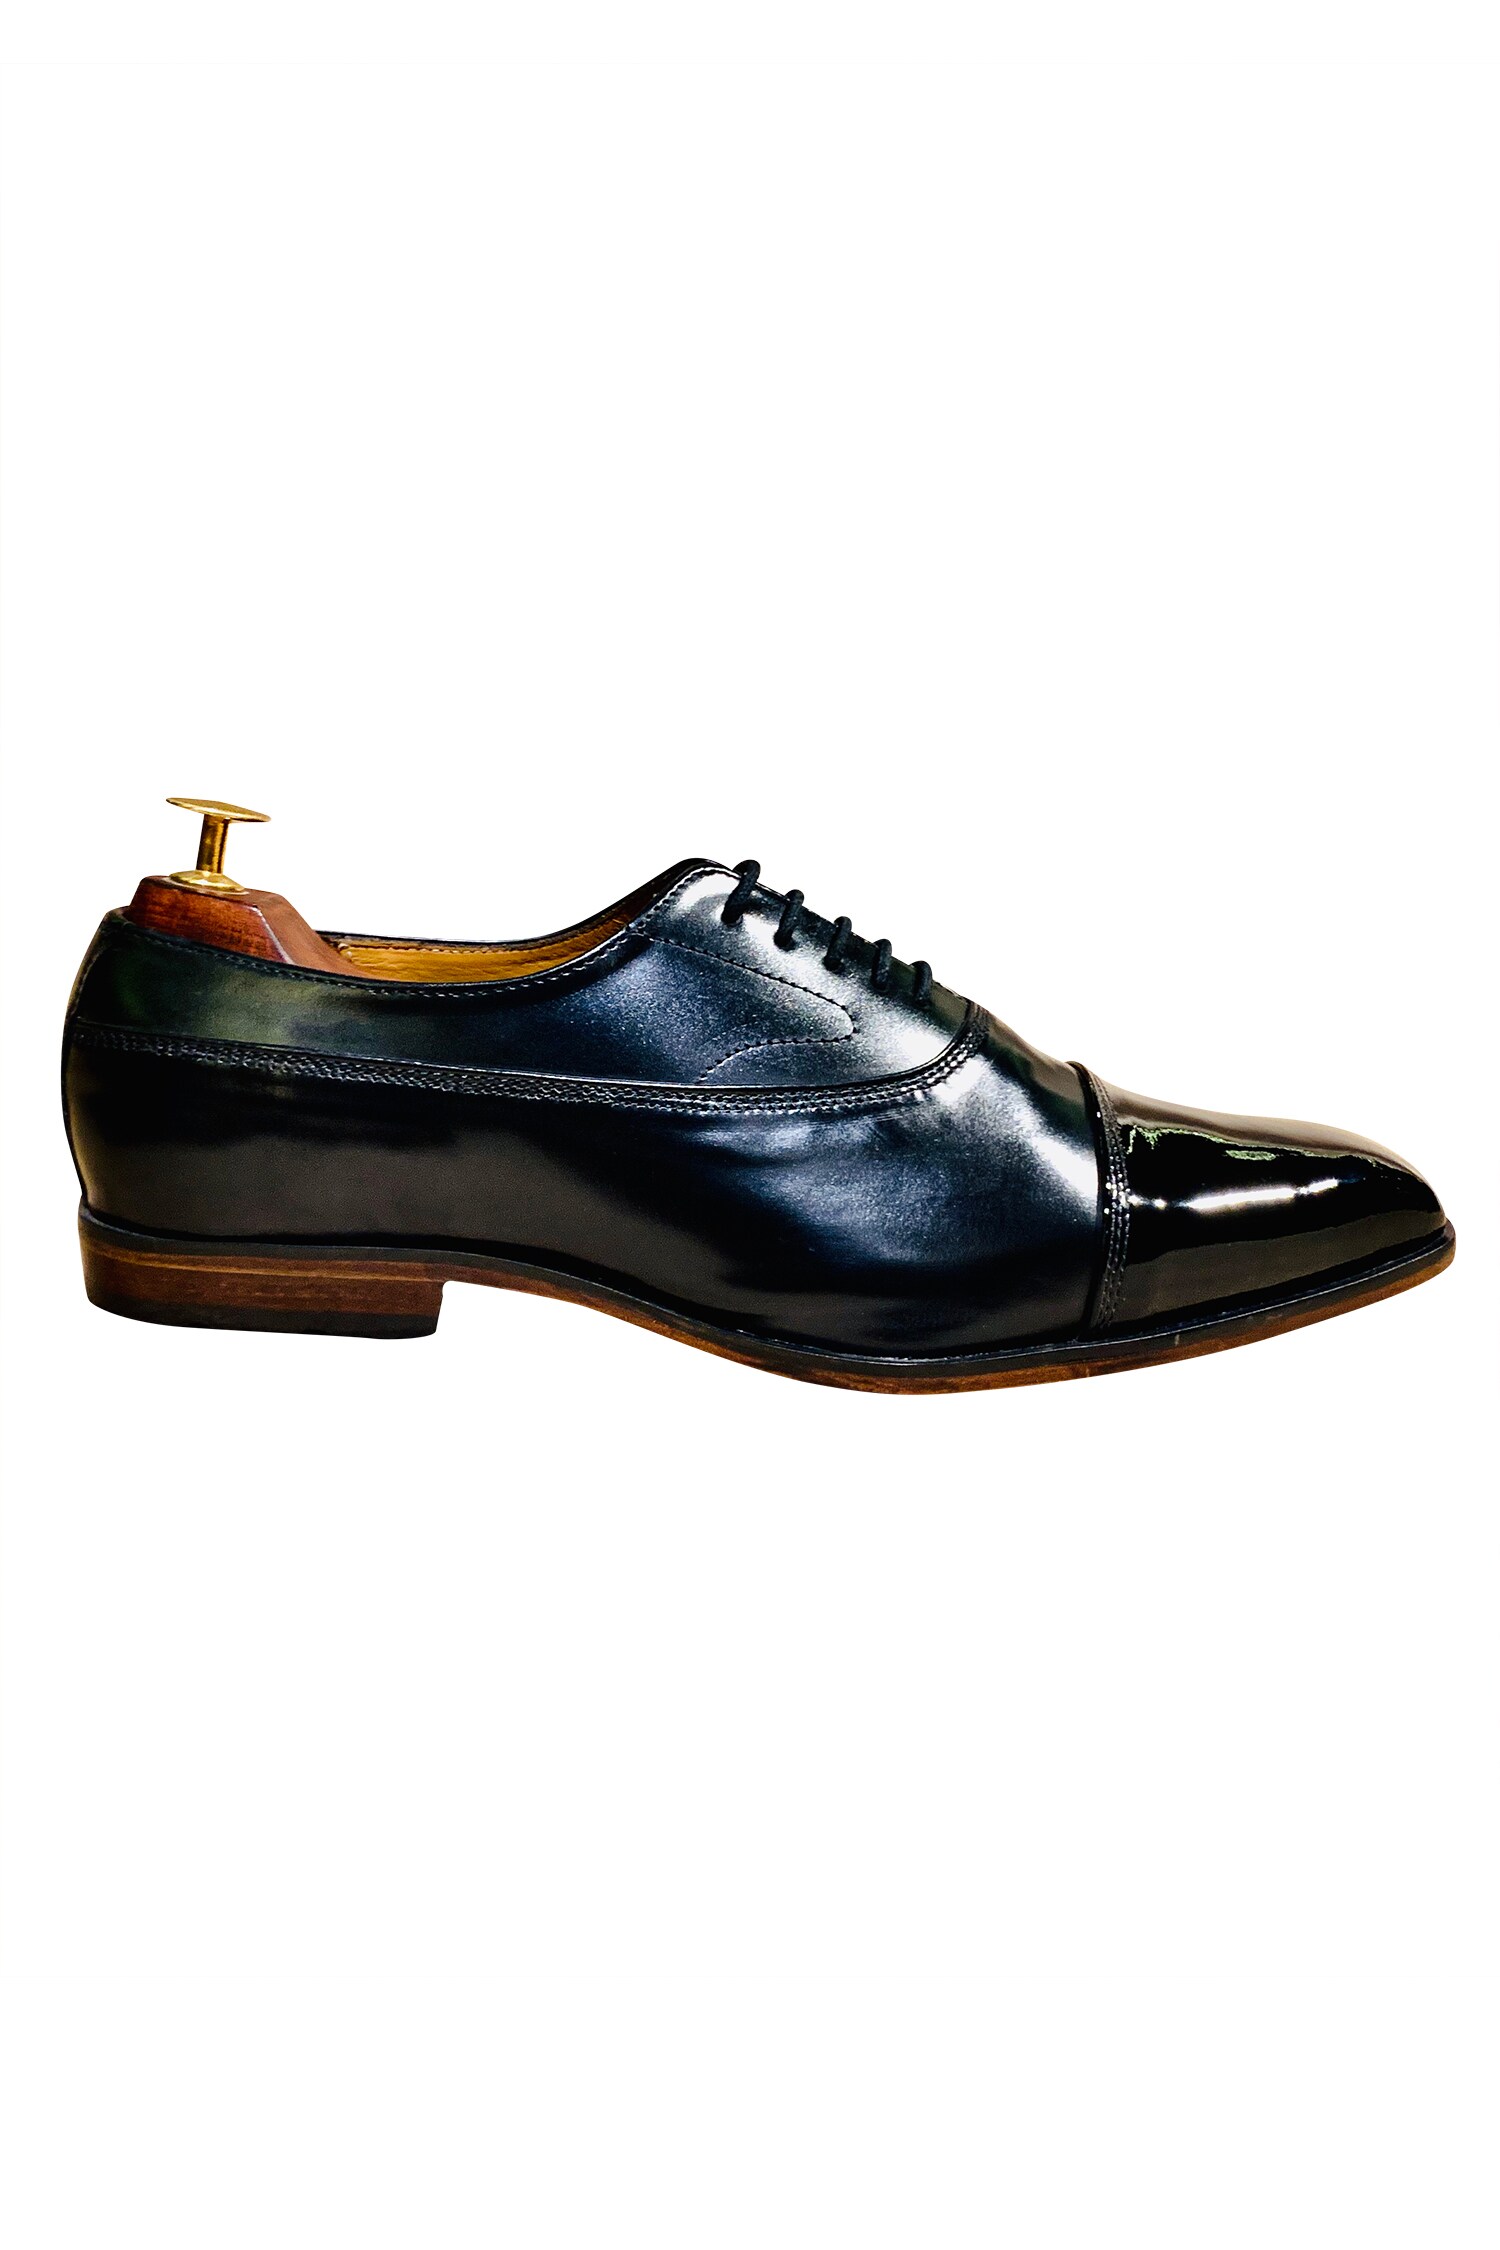 Buy Leather Derbys by Artimen at Aza Fashions